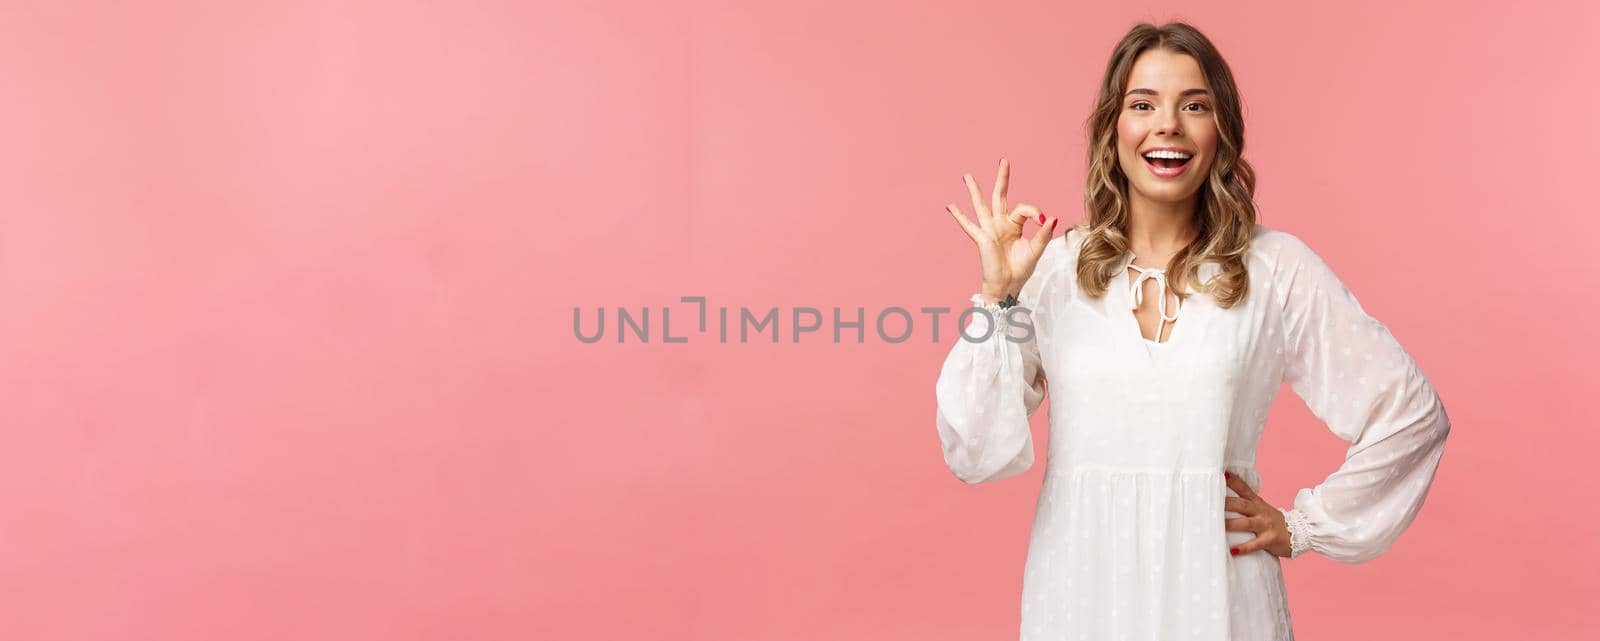 Portrait of carefree good-looking blond girl, wear white dress, guarantee you will like this special spring offer, show okay sign, agree or accept, smiling and nod in approval, pink background by Benzoix